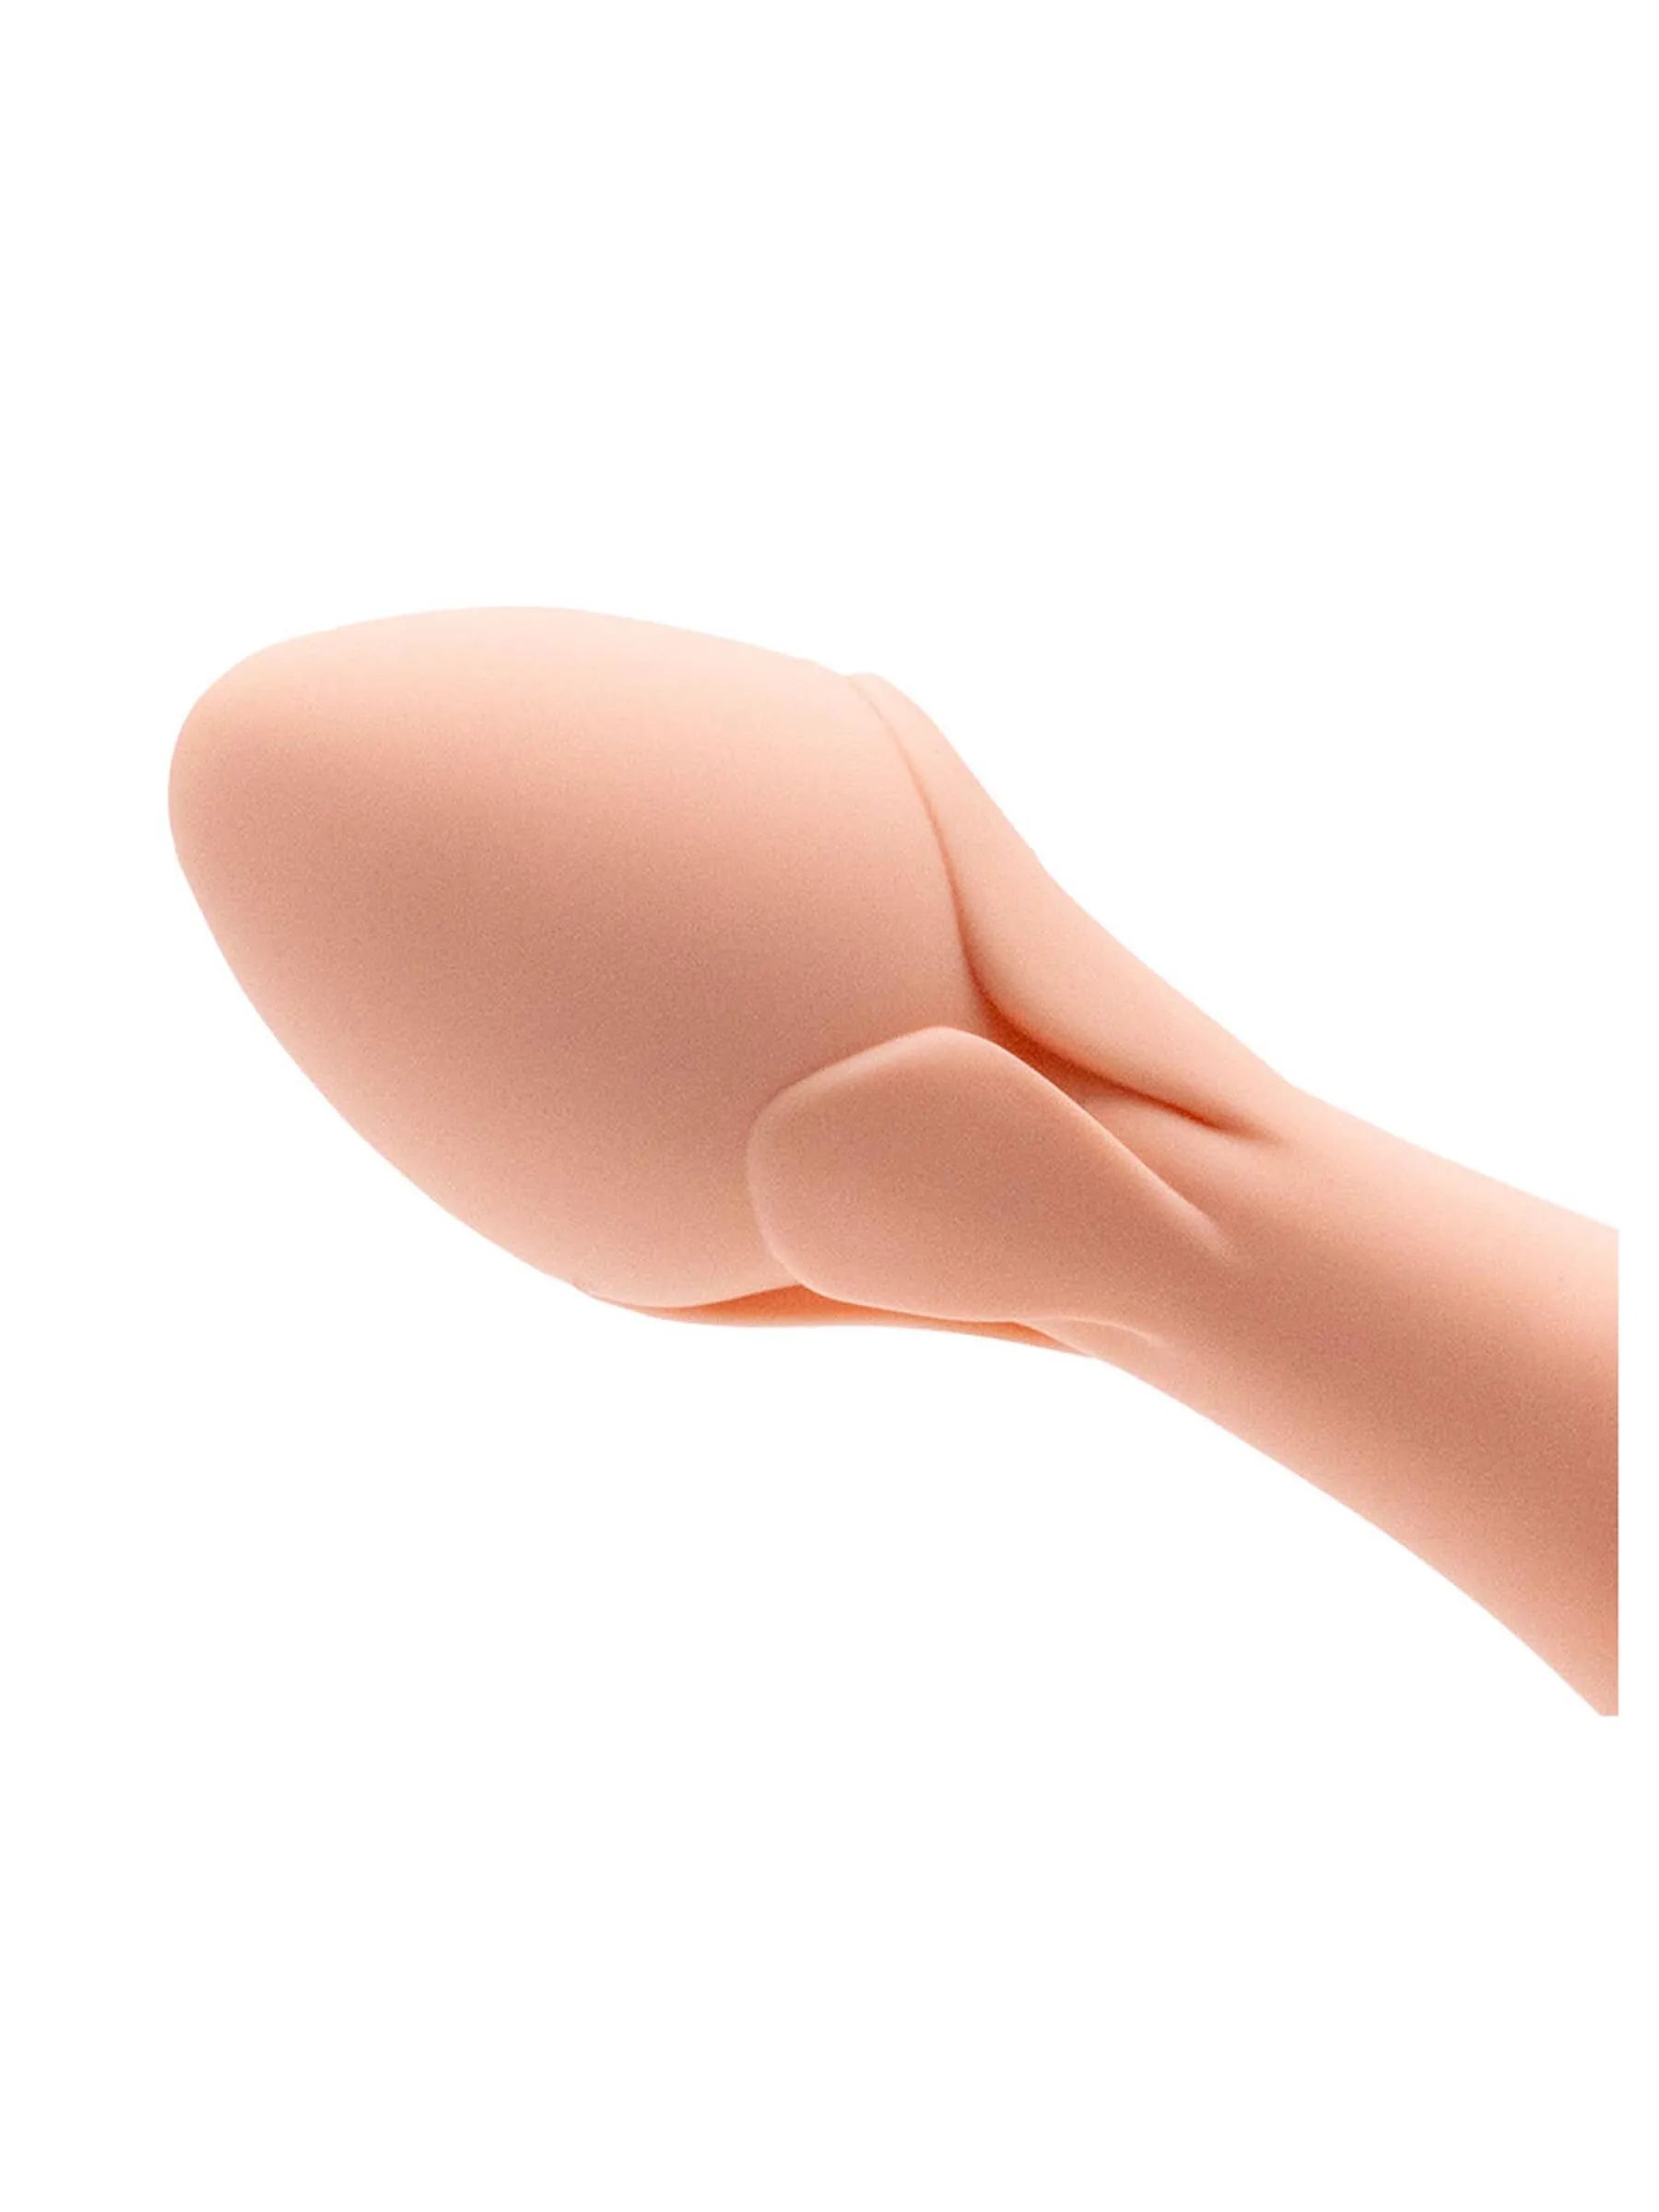 Vush Rose Clitoral Vibrator From Ann Summers, Image 01